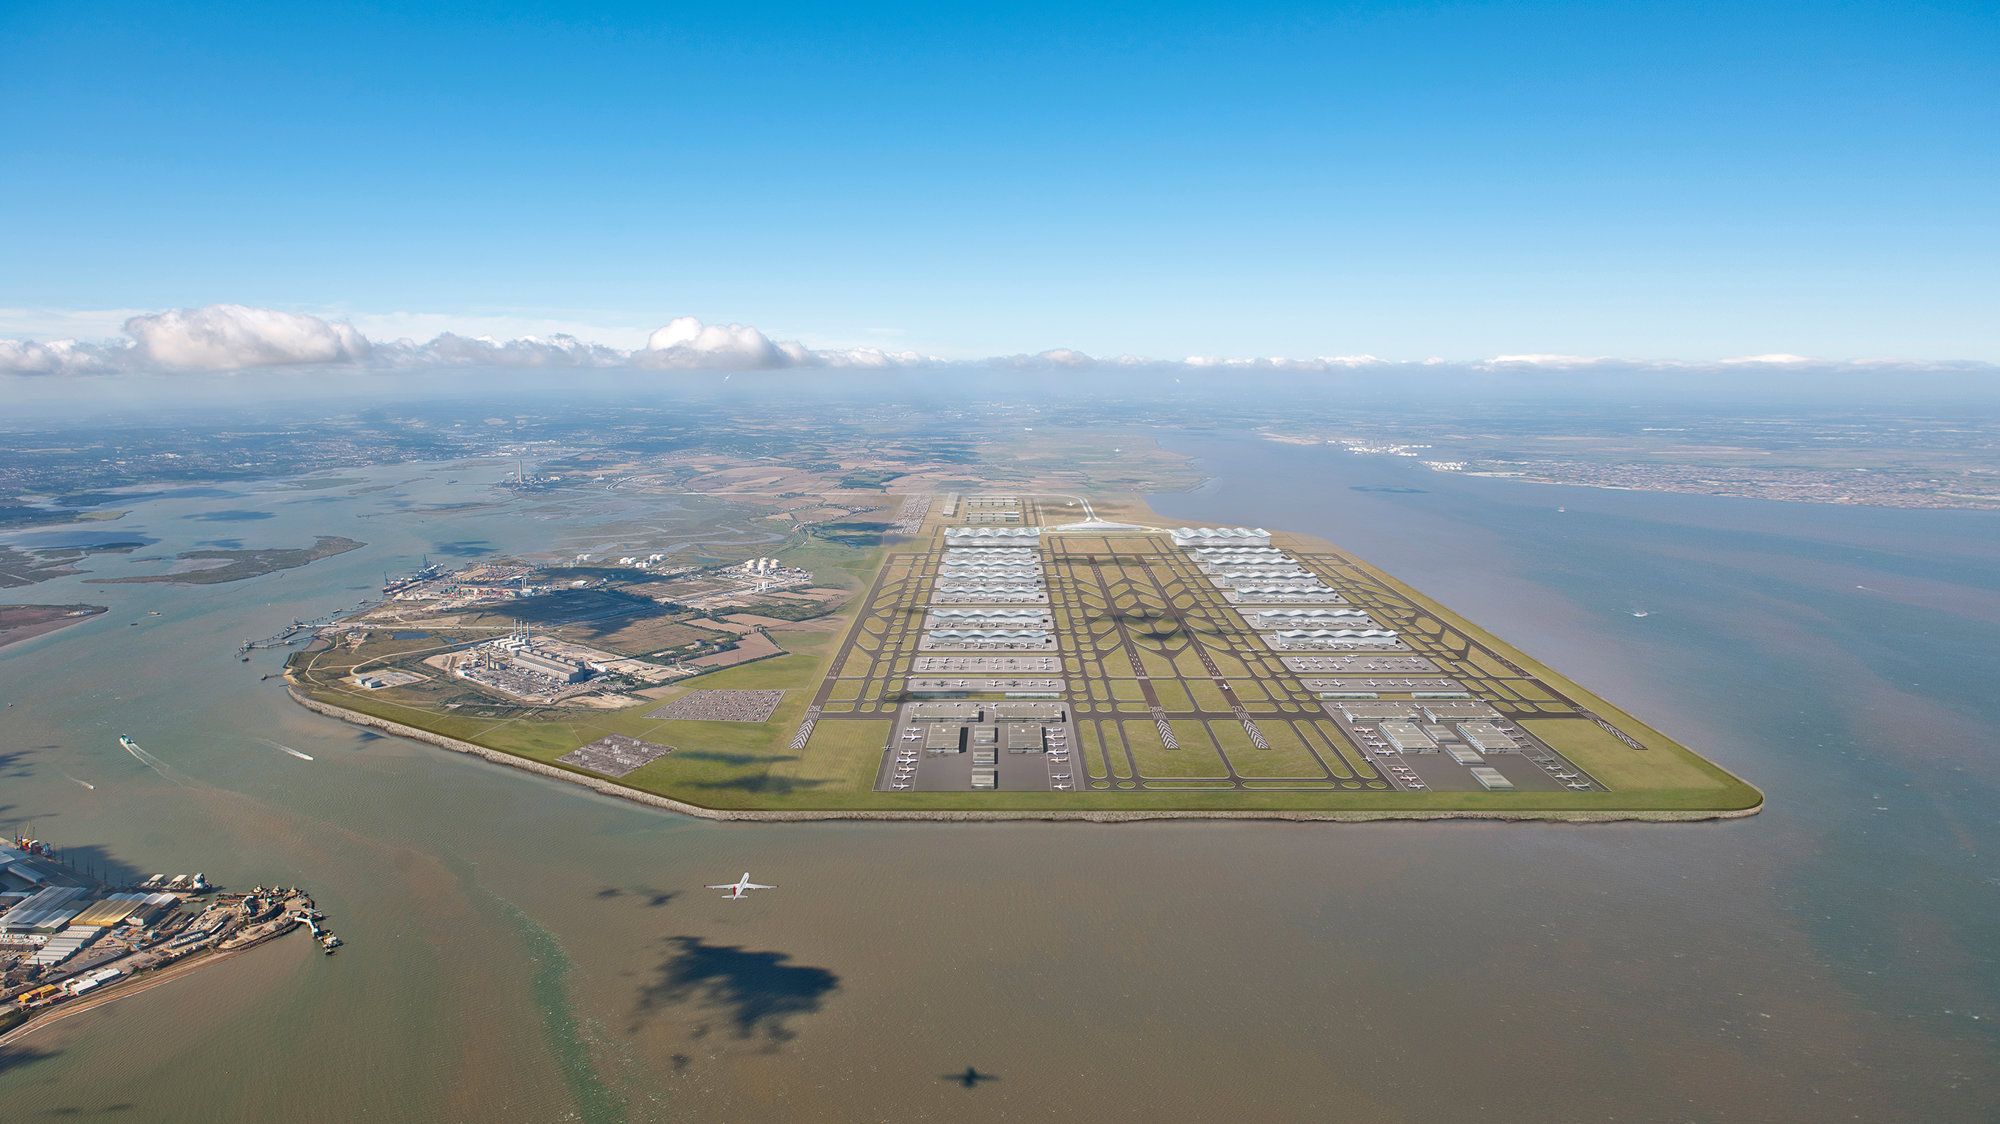 Expression Of Intent To Submit Thames Hub Airport Proposal Lodged With Airports Commission